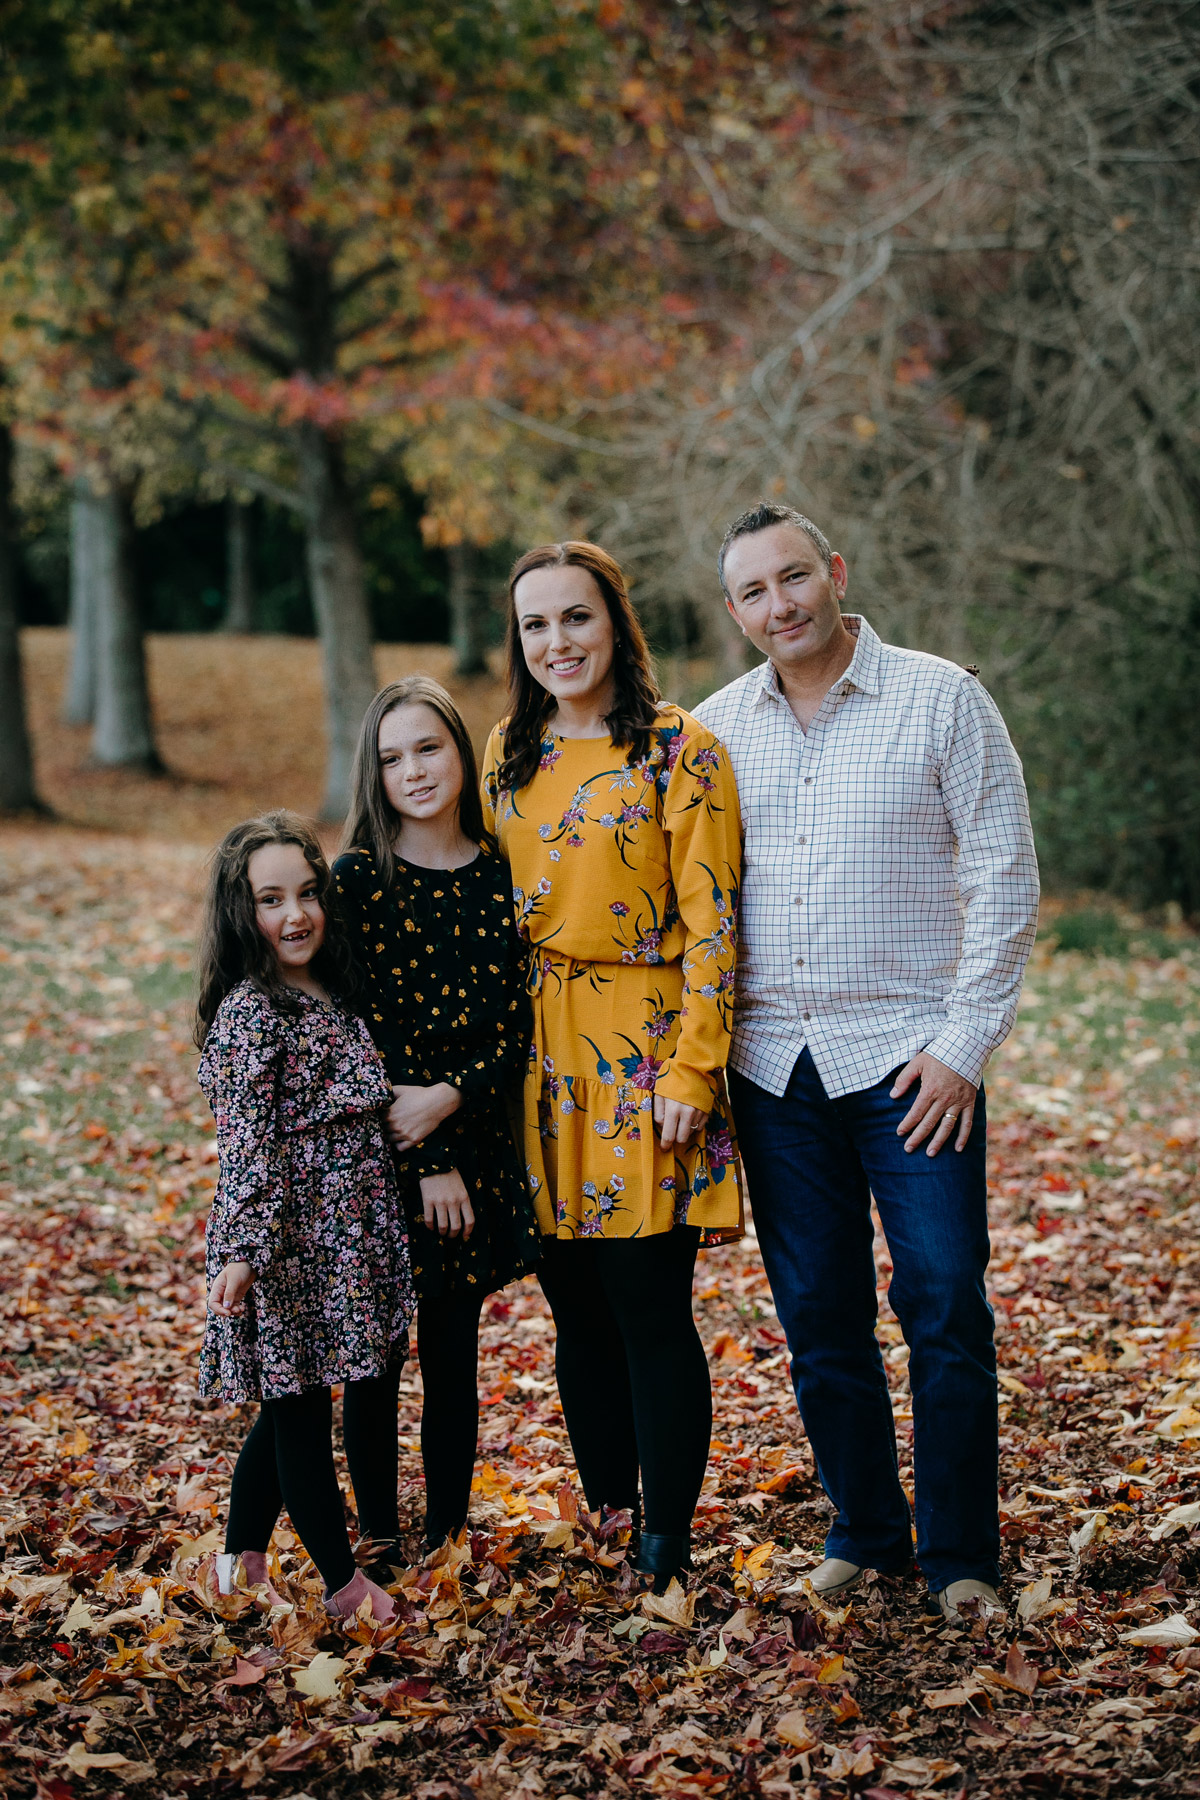 family posing together in autumn lifestyle mini portrait photoshoot session in west auckland. Photos by sarah weber photography